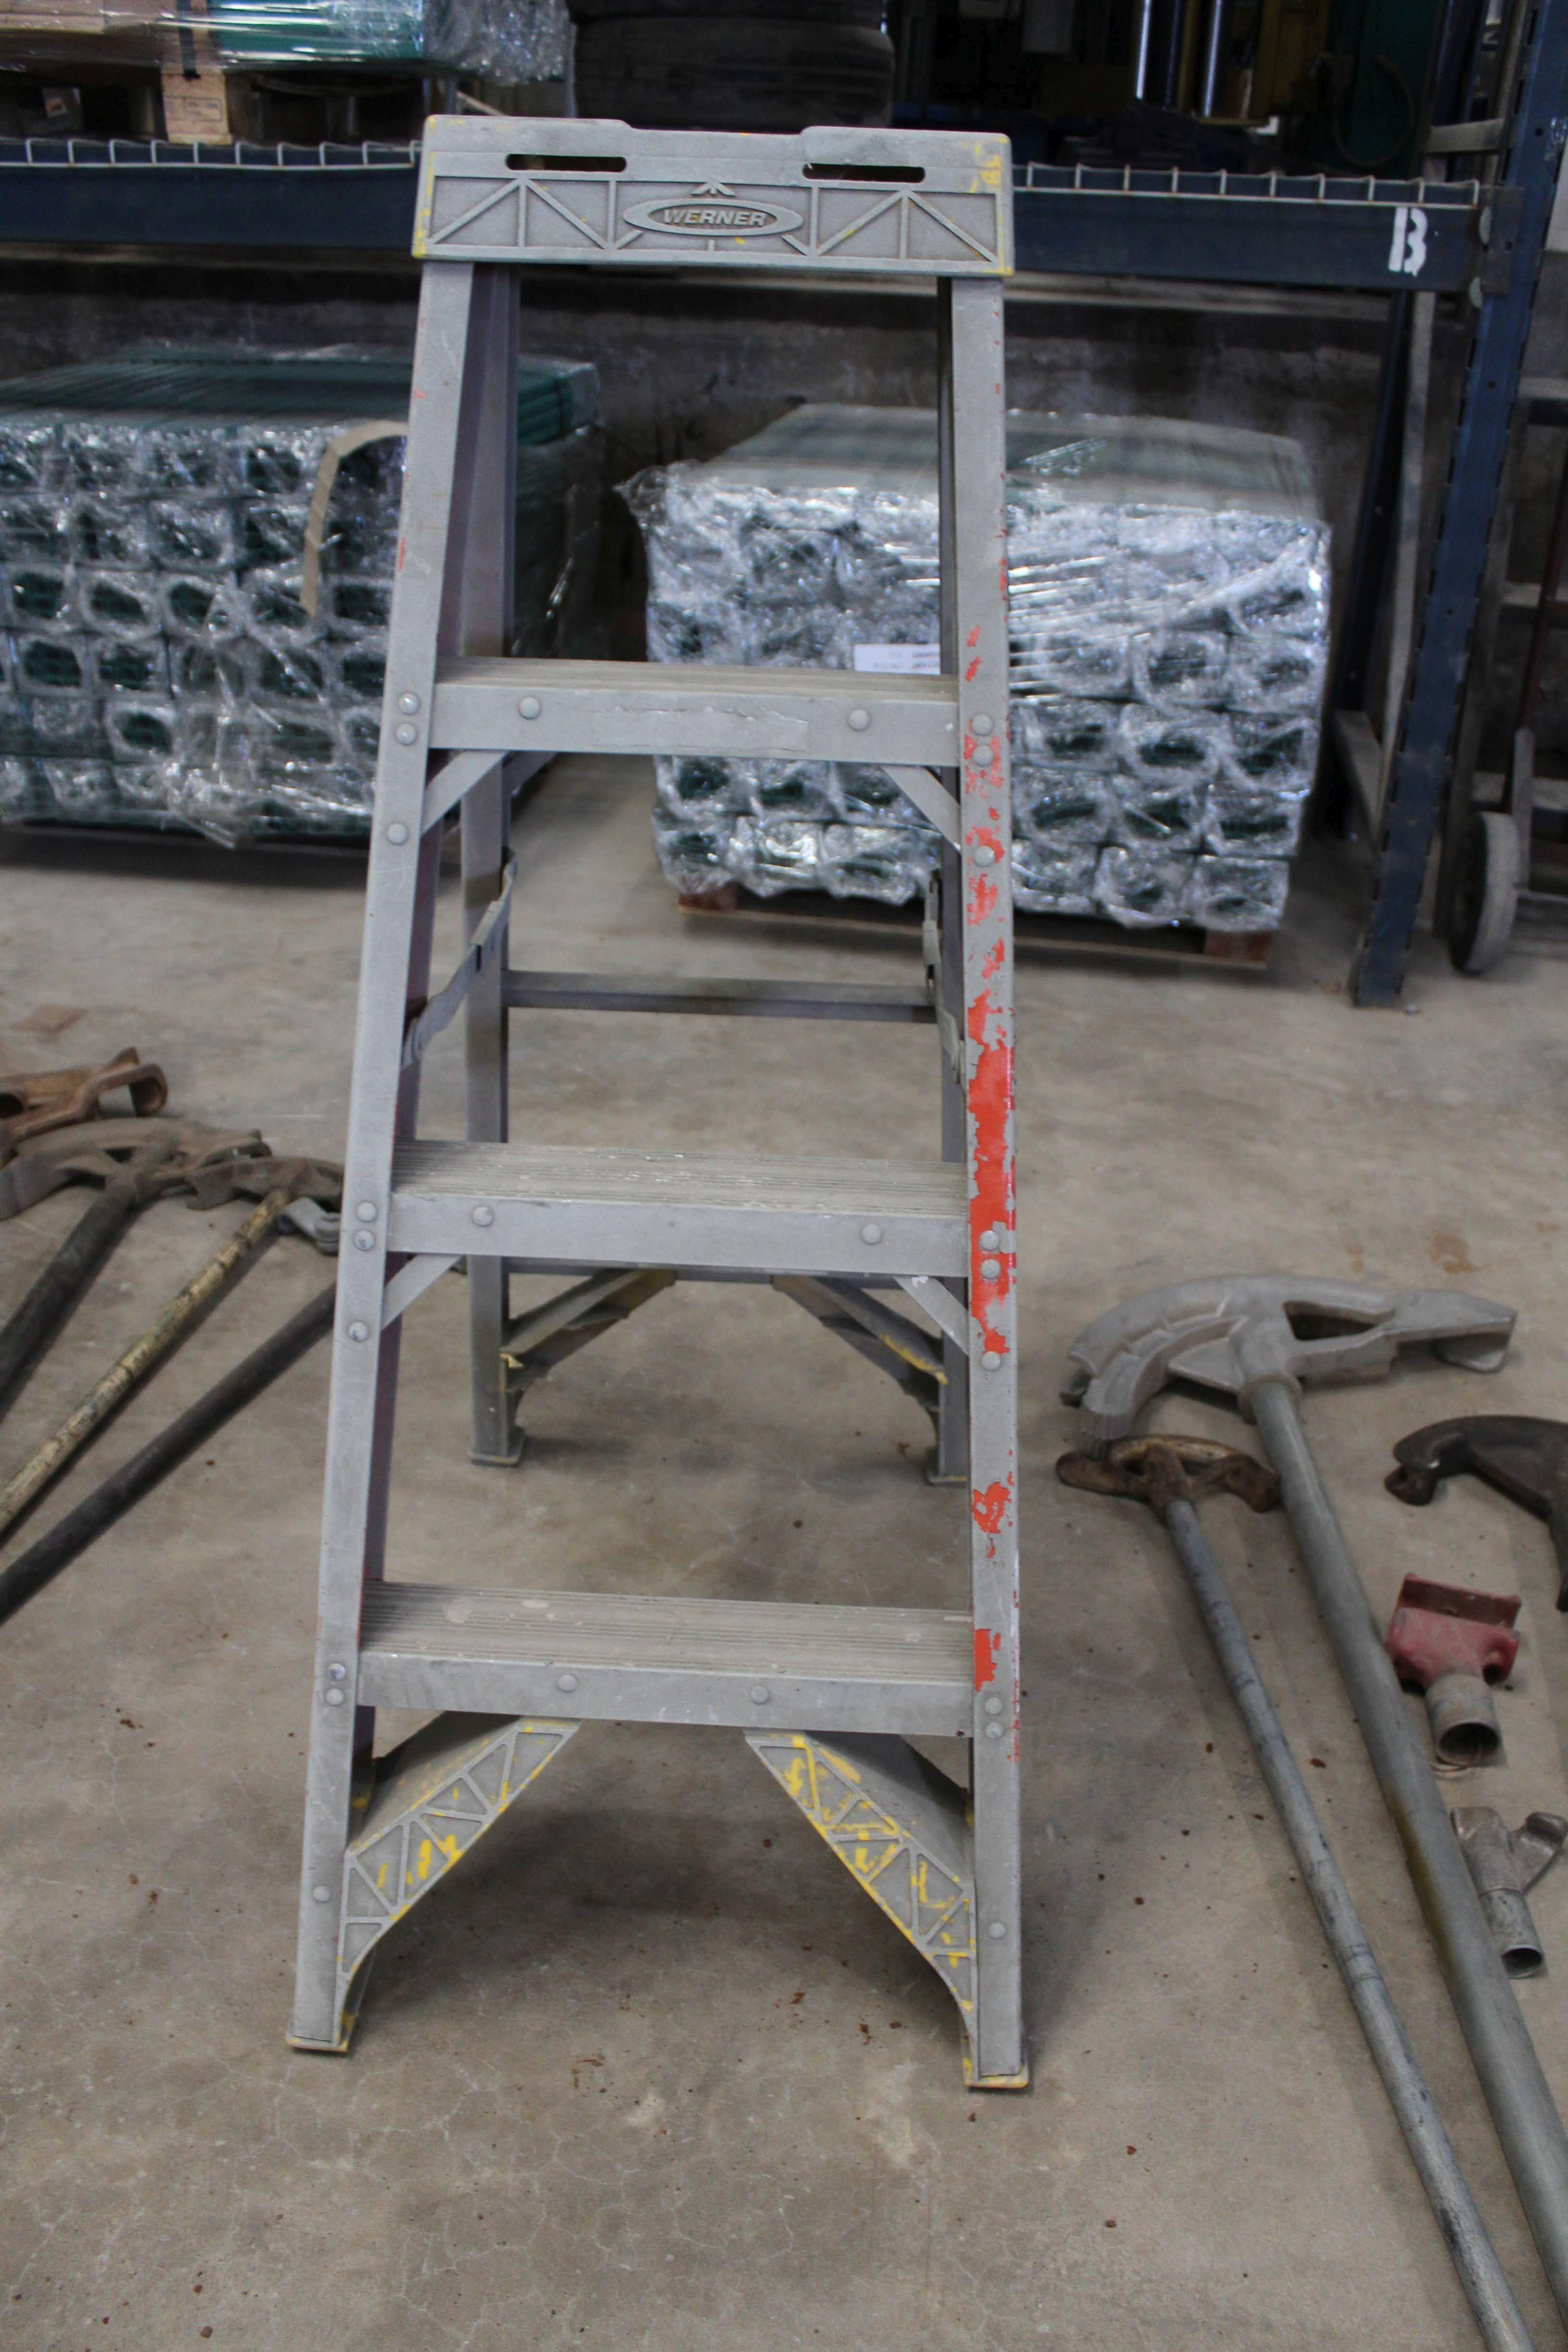 Ladder and Assorted Hand Tools